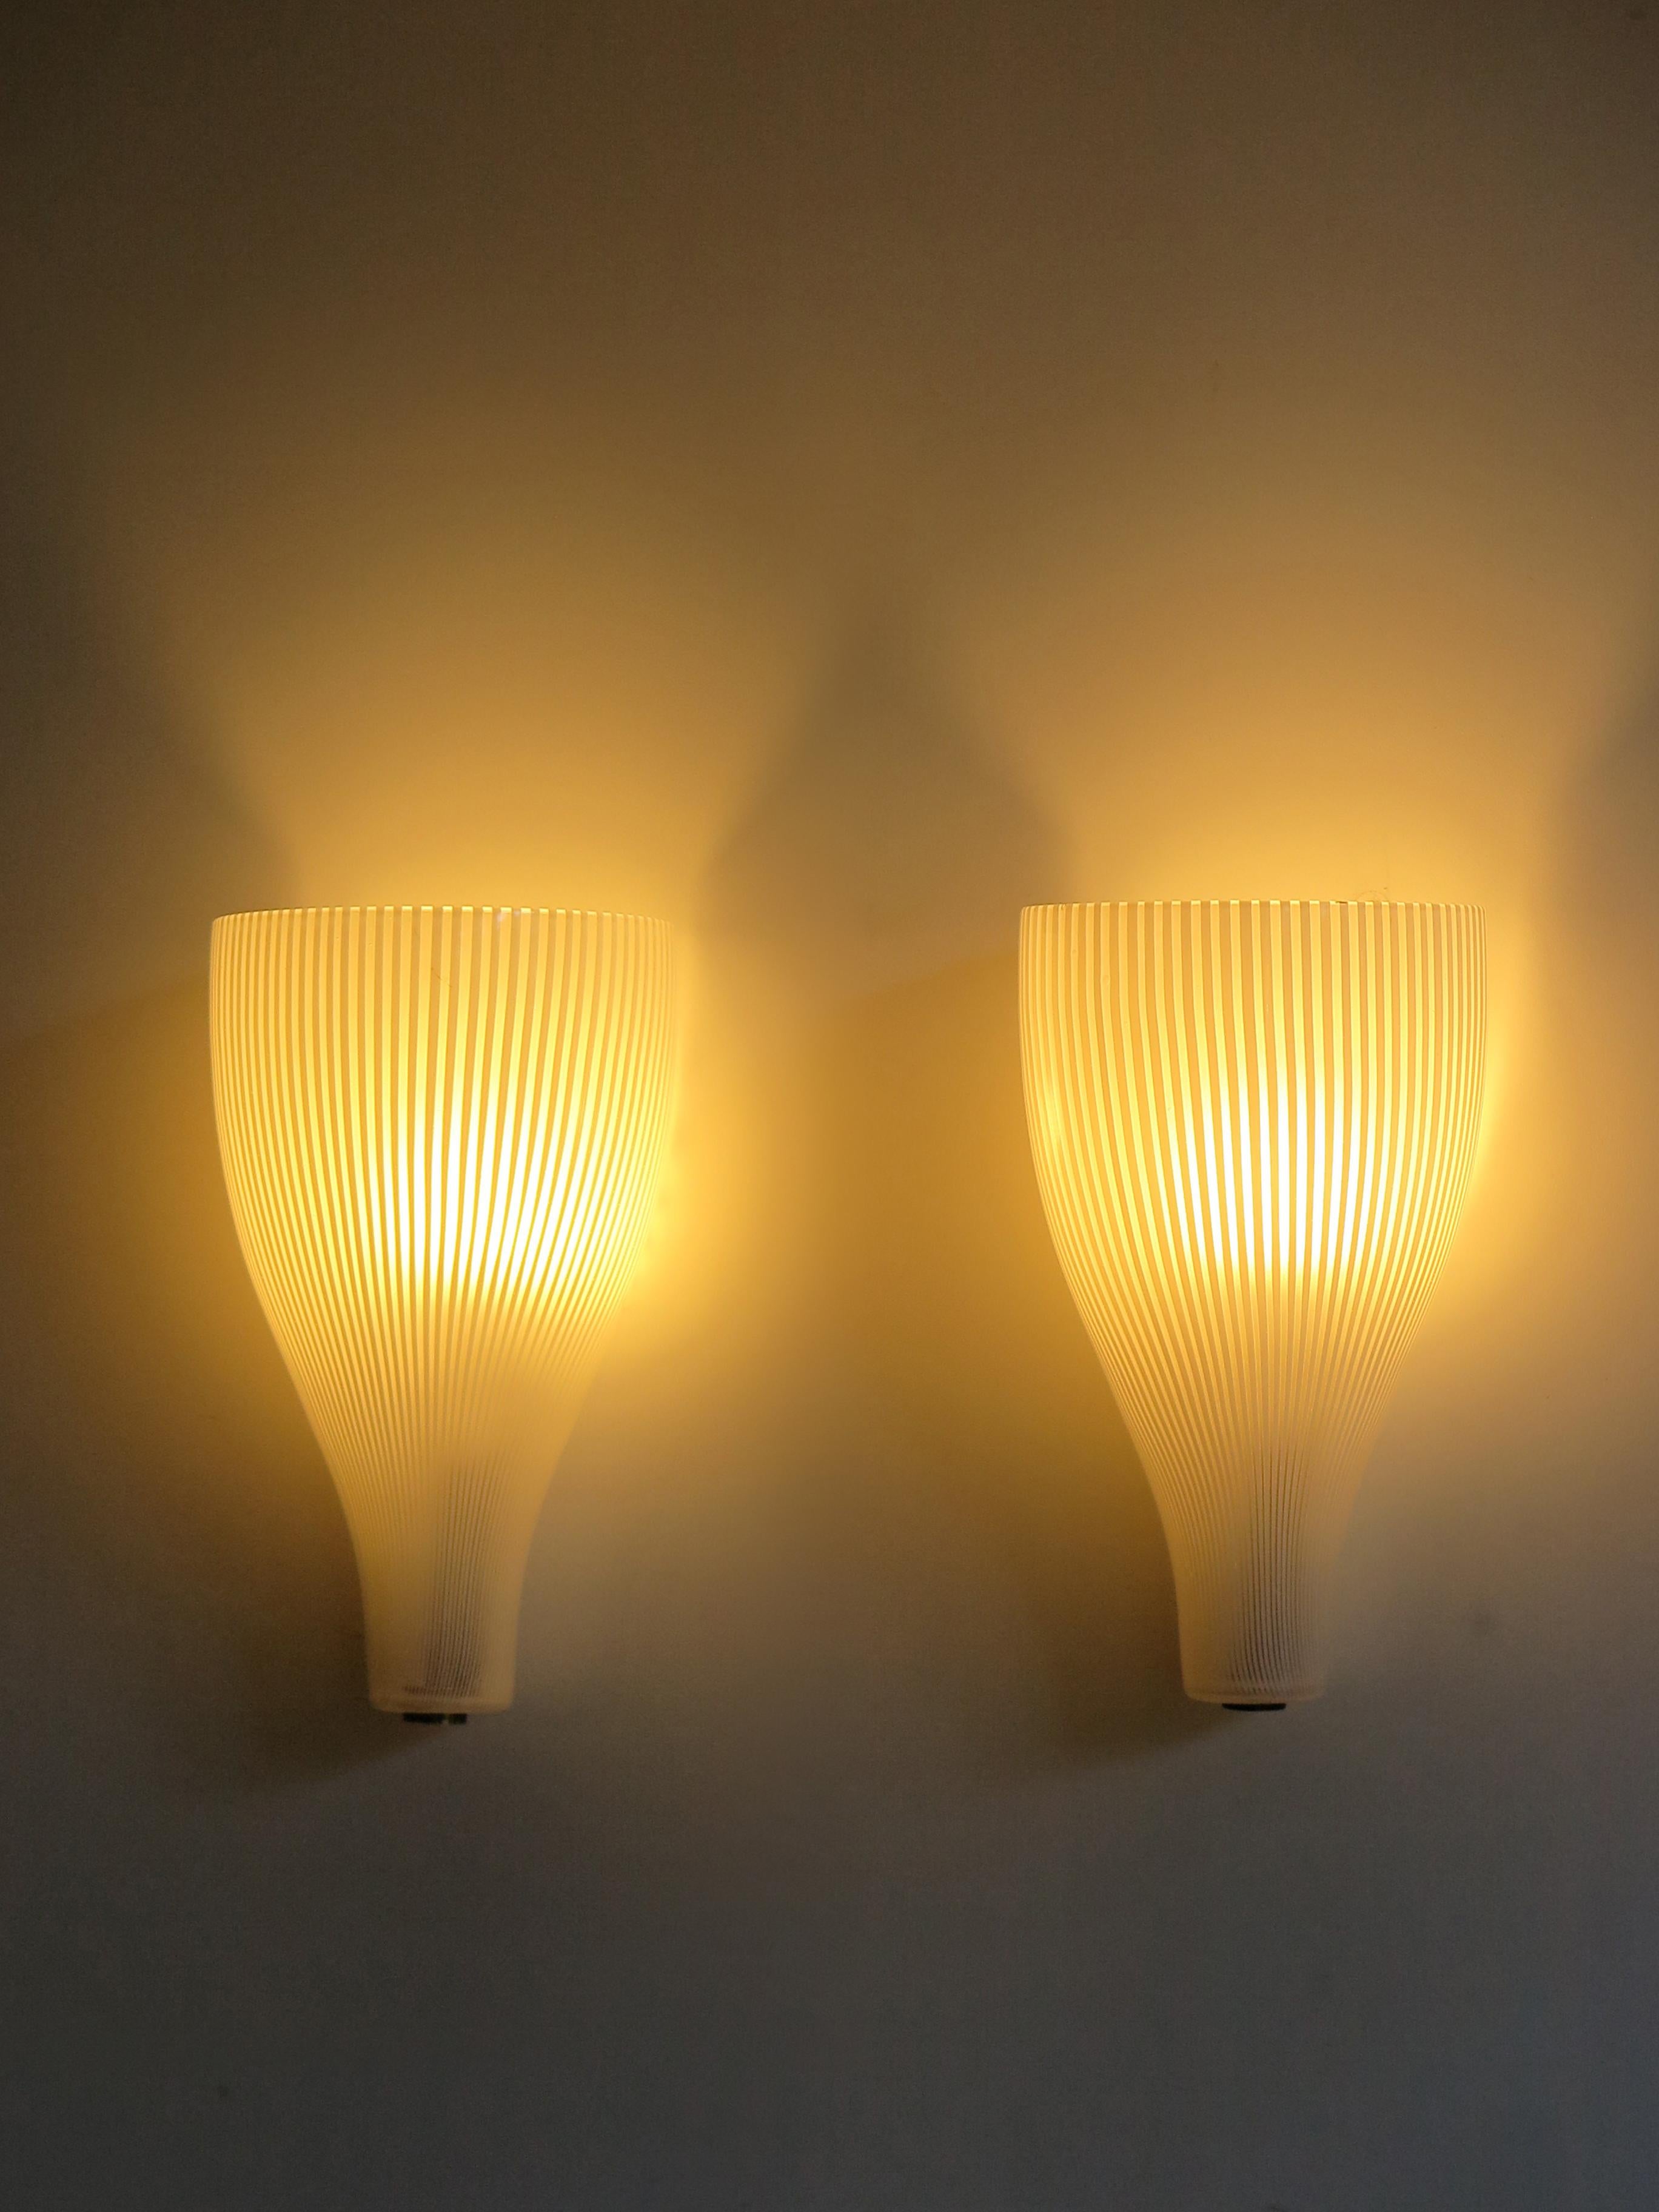 Italian glass wall lamp or sconces set designed by Massimo Vignelli for Venini, Murano, midcentury design, 1950s.

Please note that the lamps are original of the period and this shows normal signs of age and use.
The glasses have no cracks or